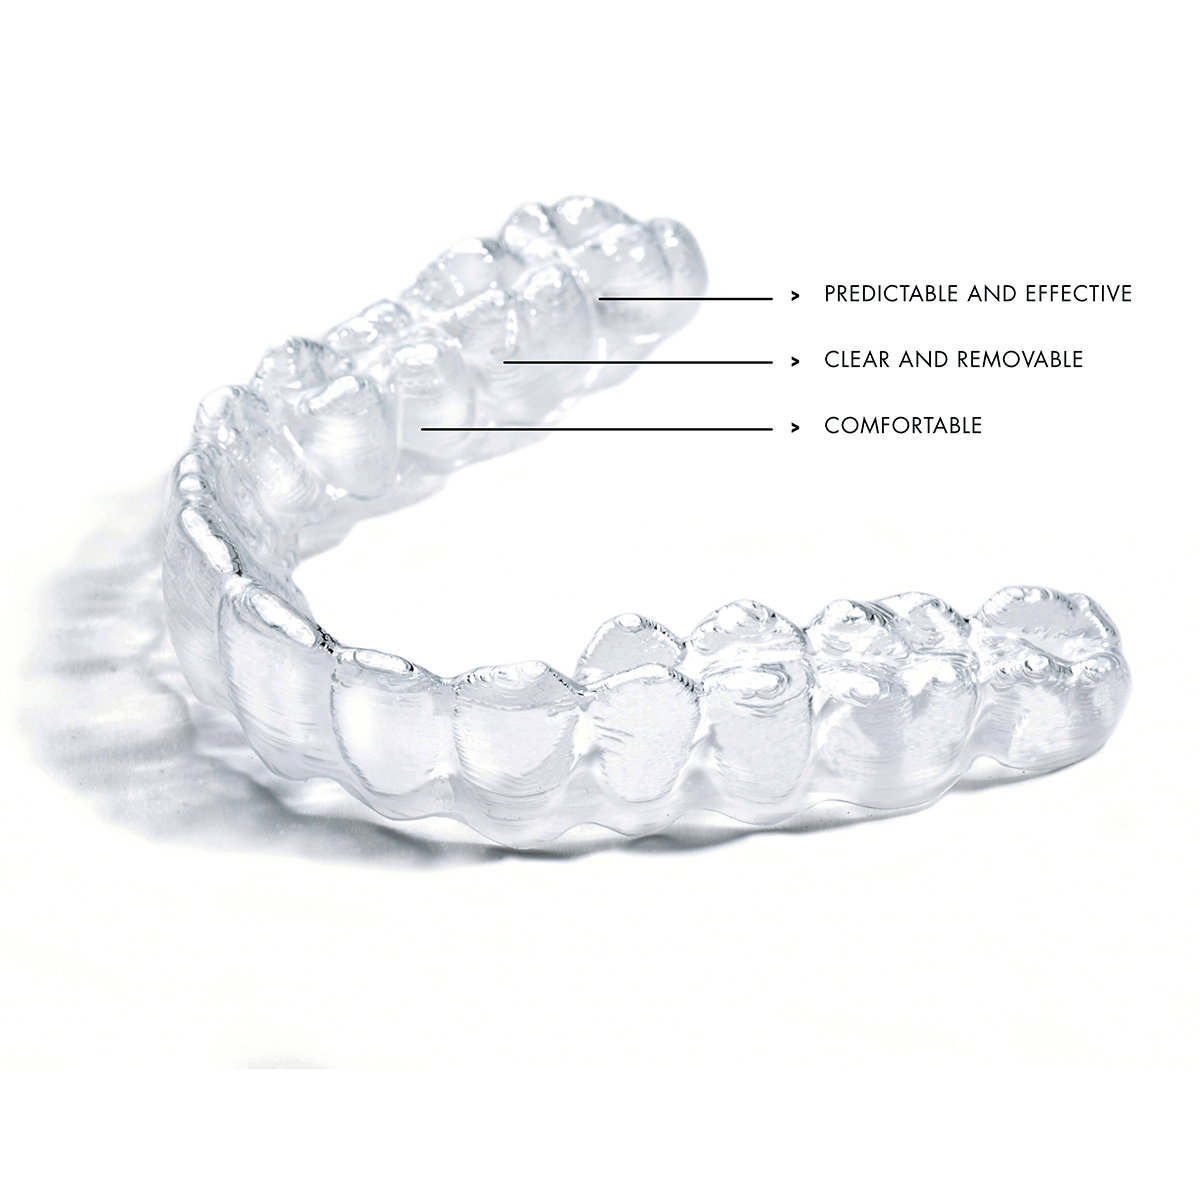 clear braces, clear aligners, active aligners reviews